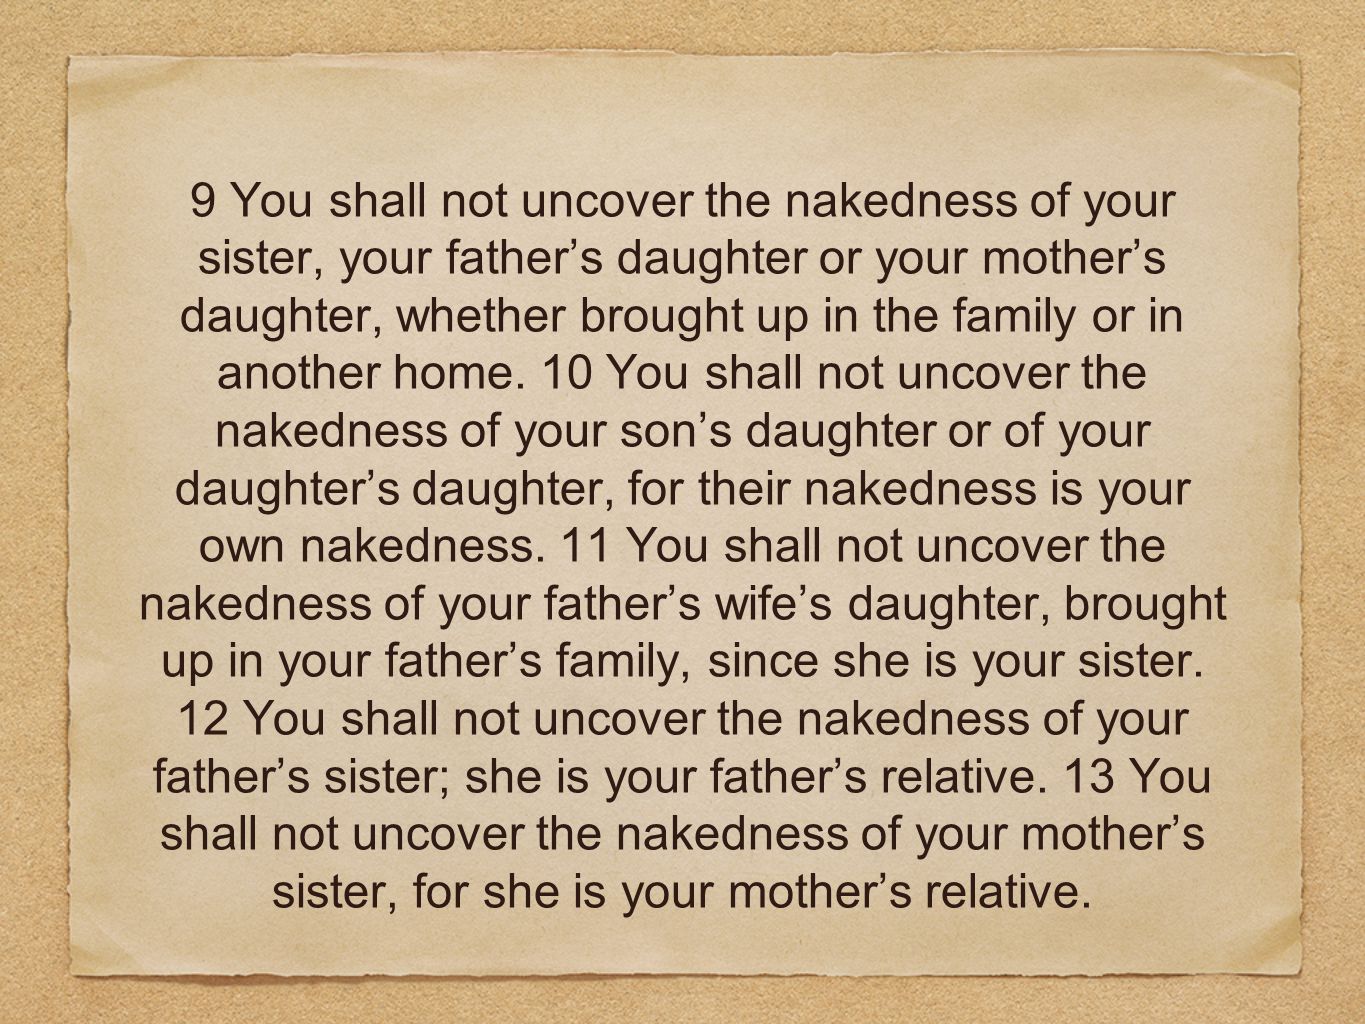 9 You shall not uncover the nakedness of your sister, your father’s daughter or your mother’s daughter, whether brought up in the family or in another home.